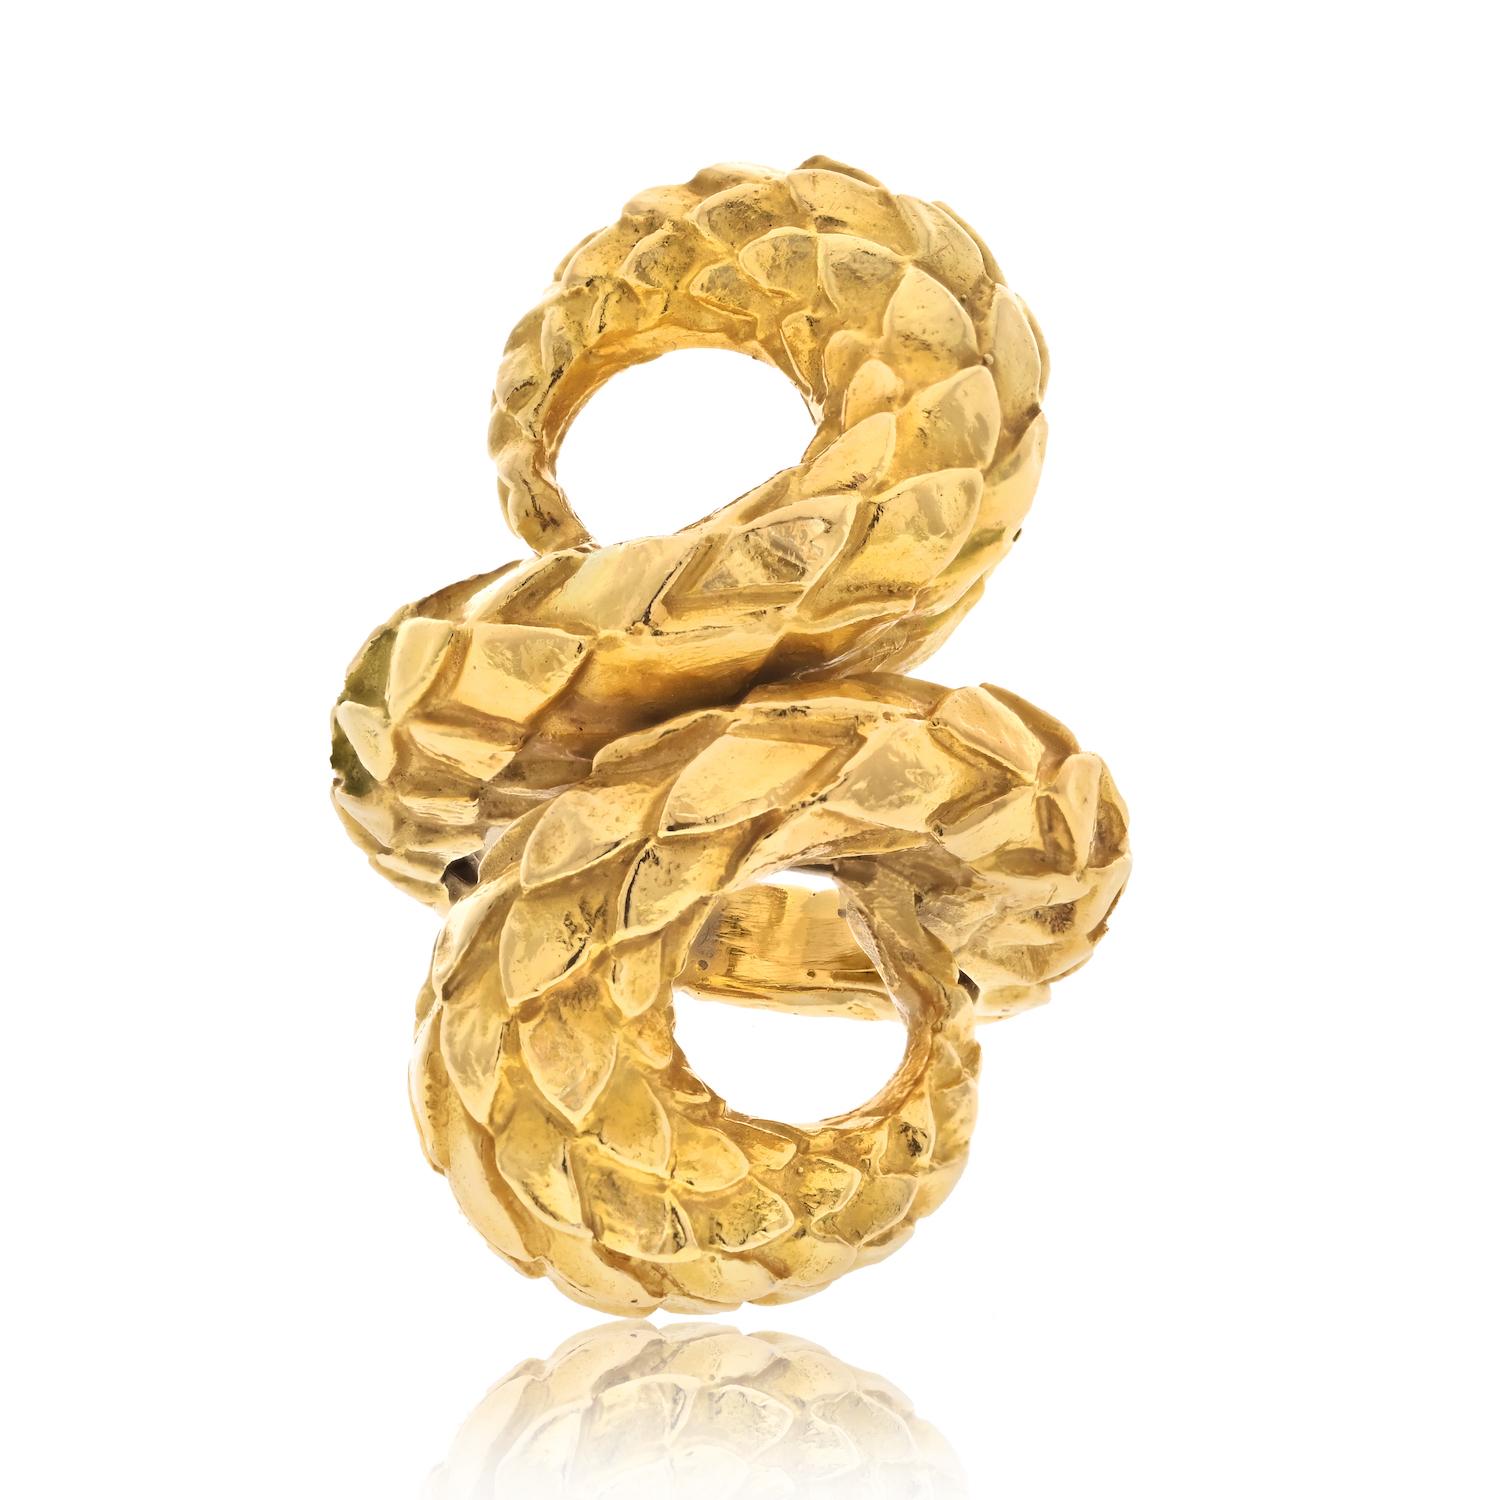 Estate David Webb Platinum & 18K Yellow Gold Twisted Scales Ring: A Unique Blend of Elegance. 

The Estate David Webb Platinum & 18K Yellow Gold Twisted Scales Ring is a remarkable piece of jewelry that stands out not only for its exquisite